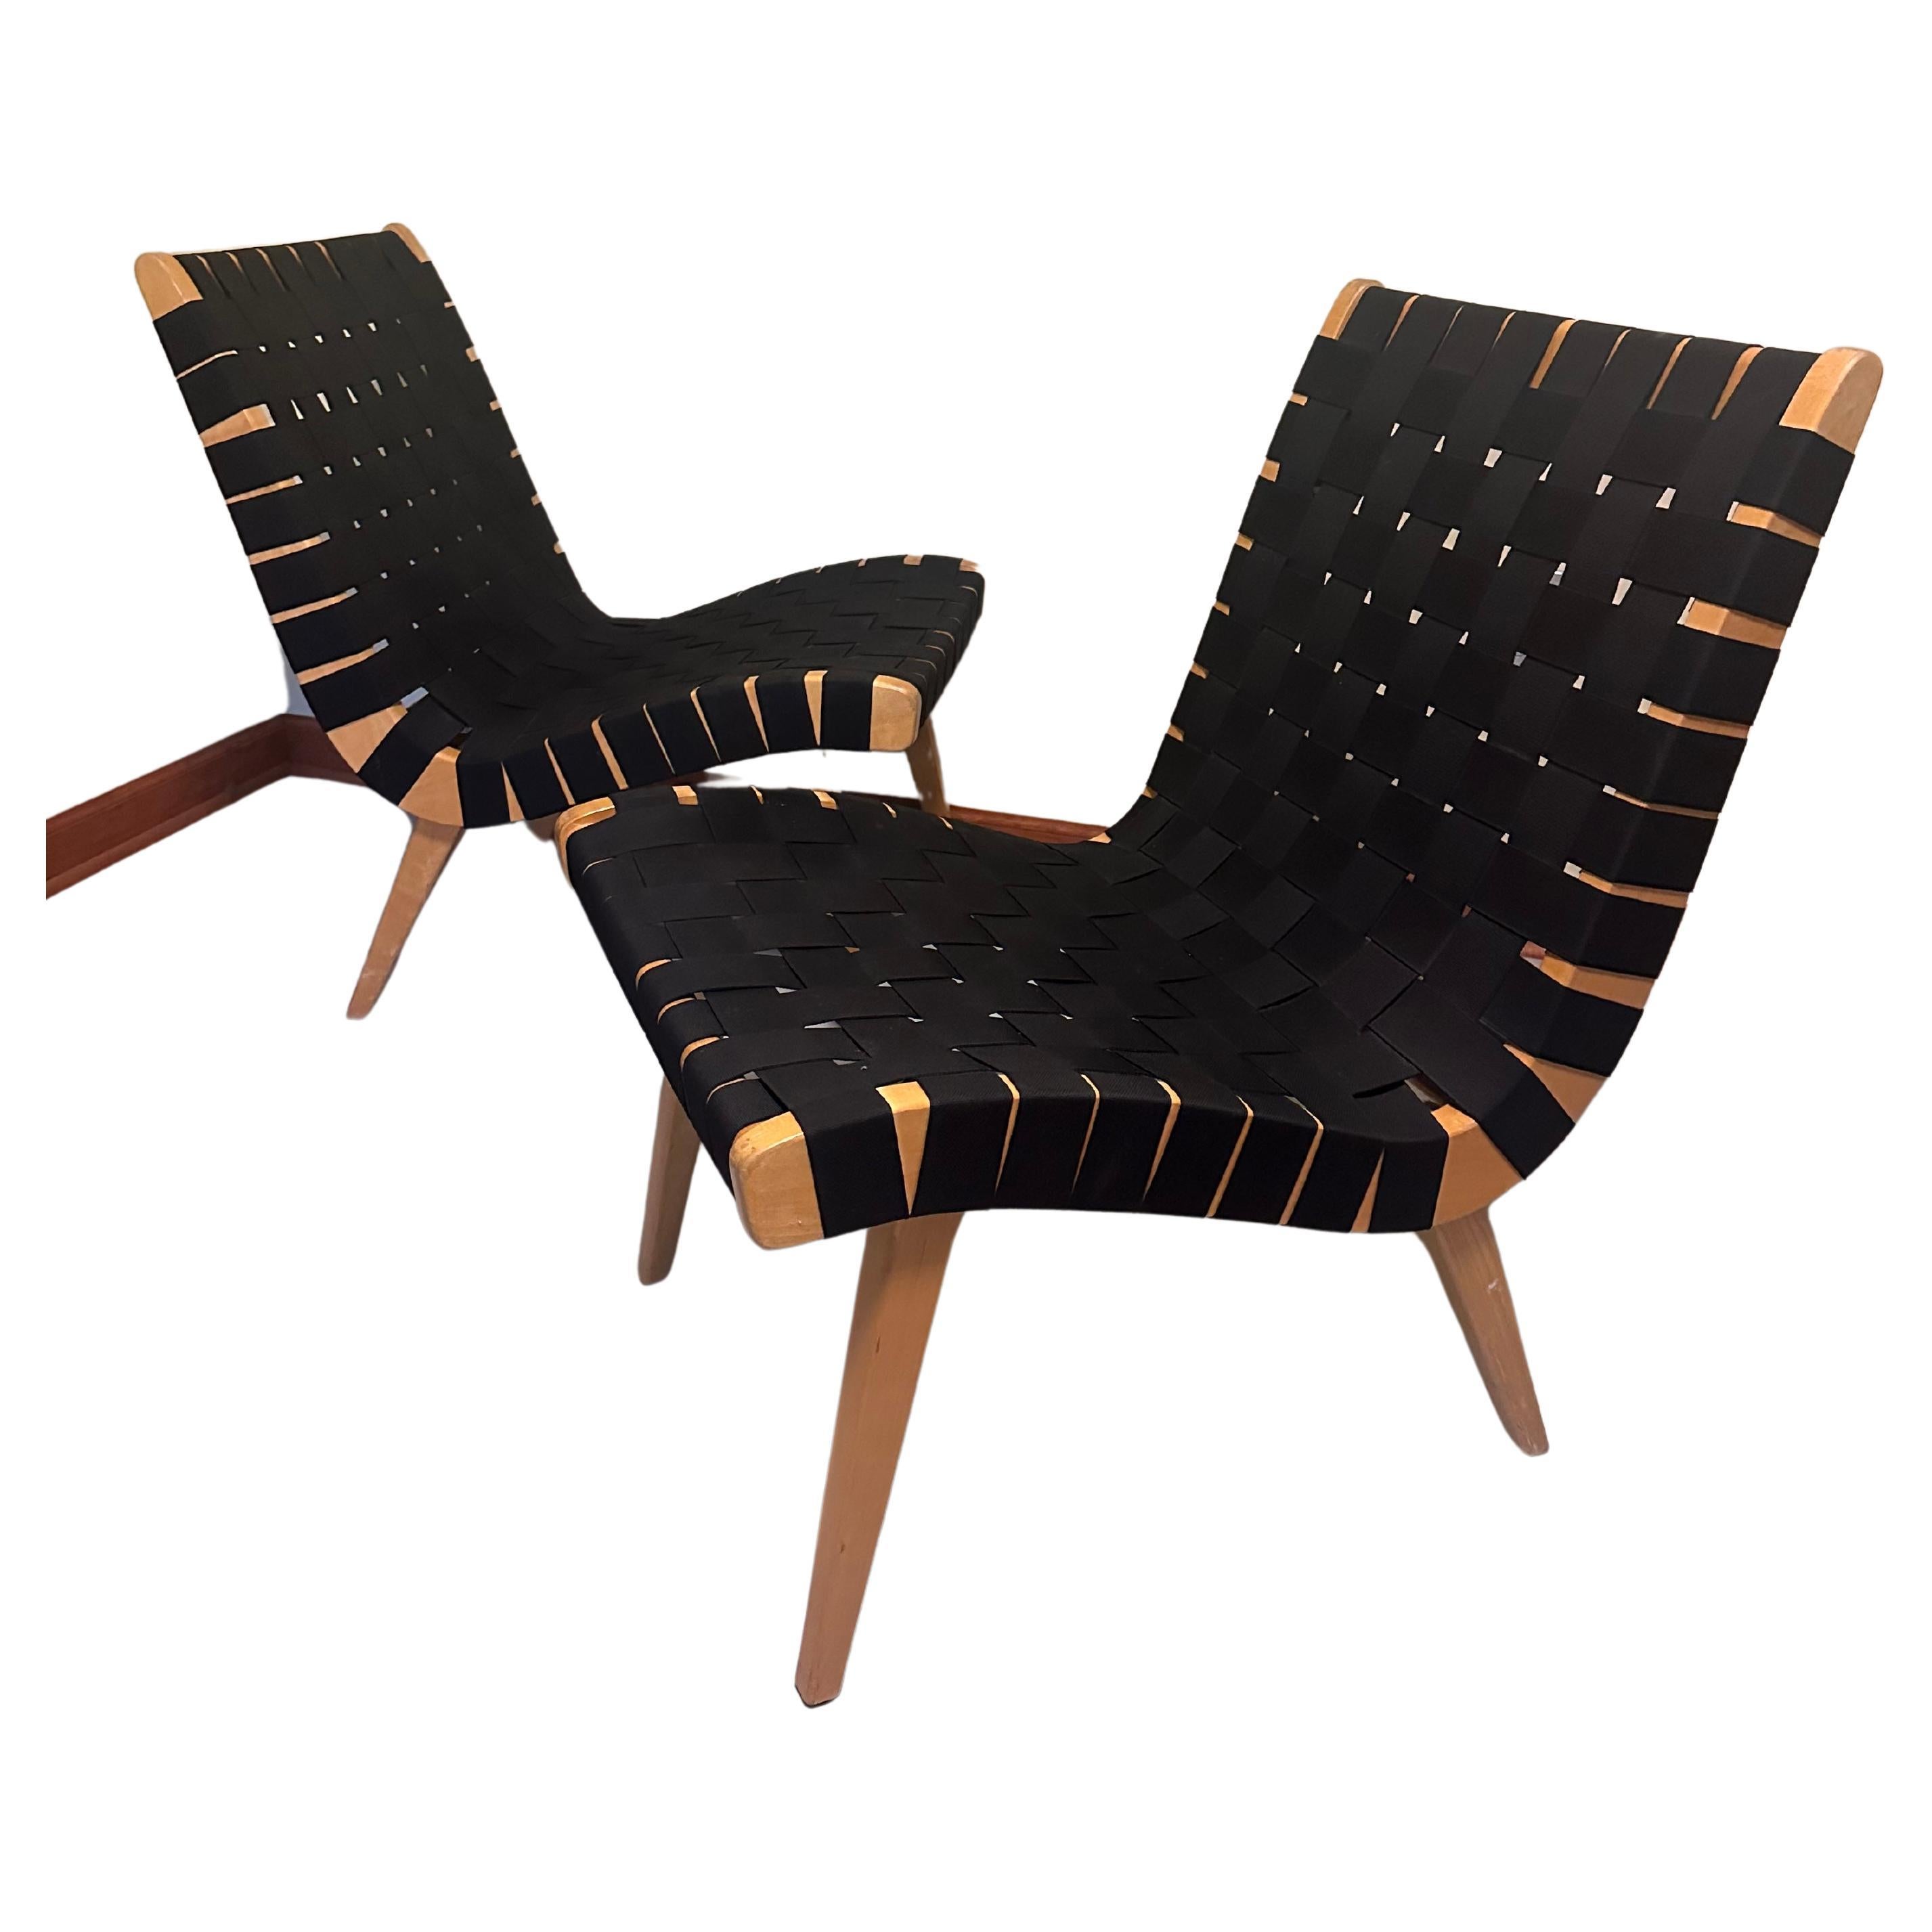 Jens Risom for Knoll lounge chair pair 